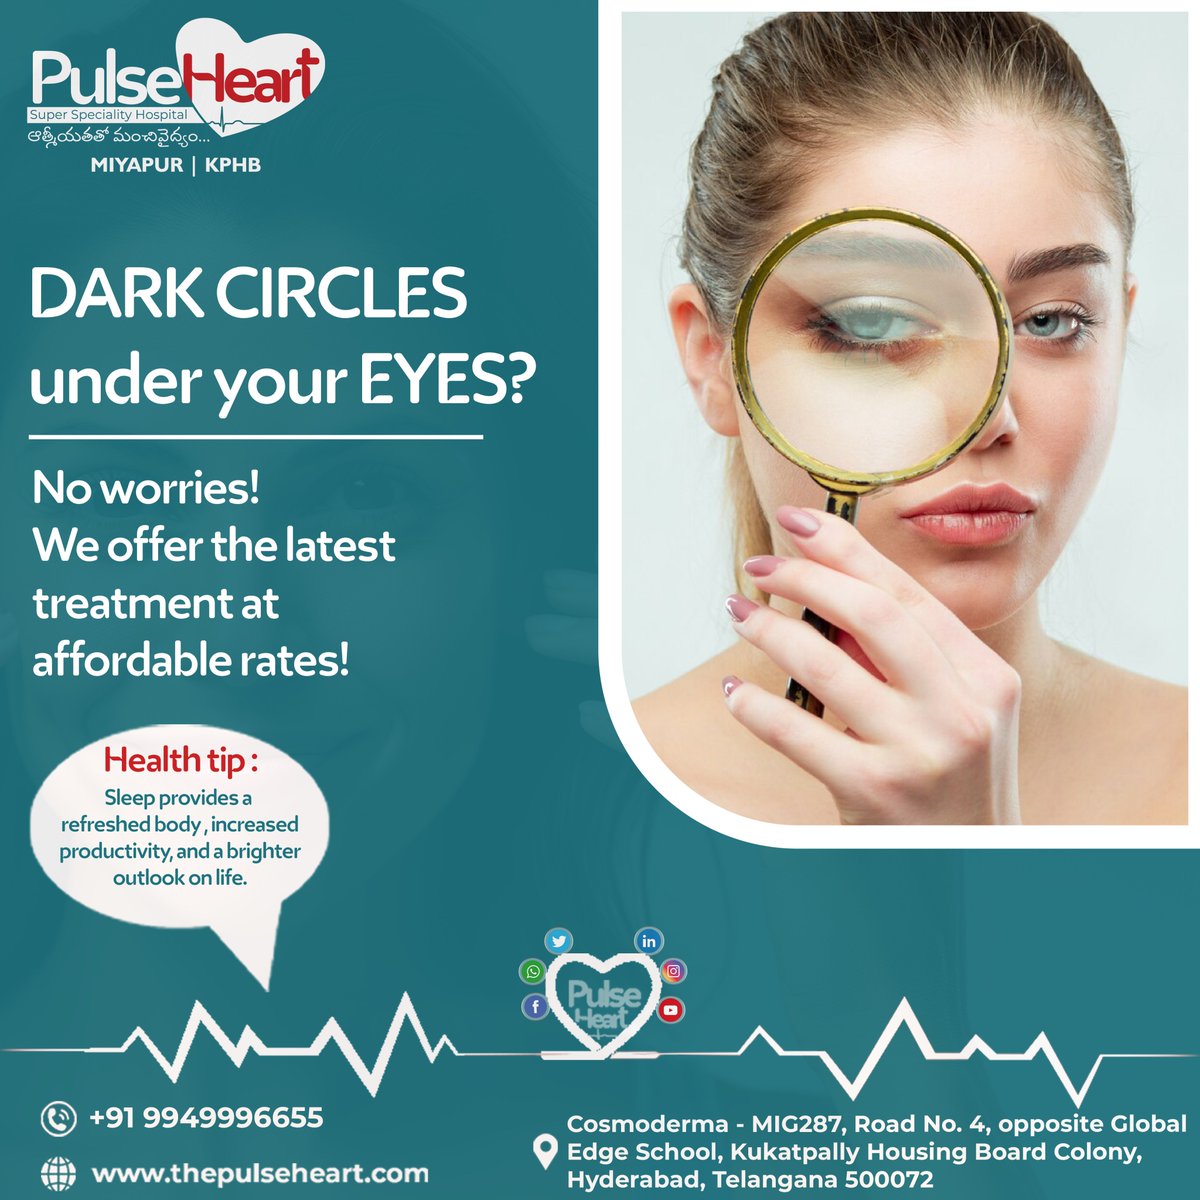 Banish Dark Circles with Our Cutting-Edge Treatments!🌟👀  Tired of #darkcircles under your eyes? No worries! We offer the #latesttreatments to help you look refreshed & rejuvenated, all at affordable rates. Say goodbye to tired eyes and hello to a brighter, youthful appearance!